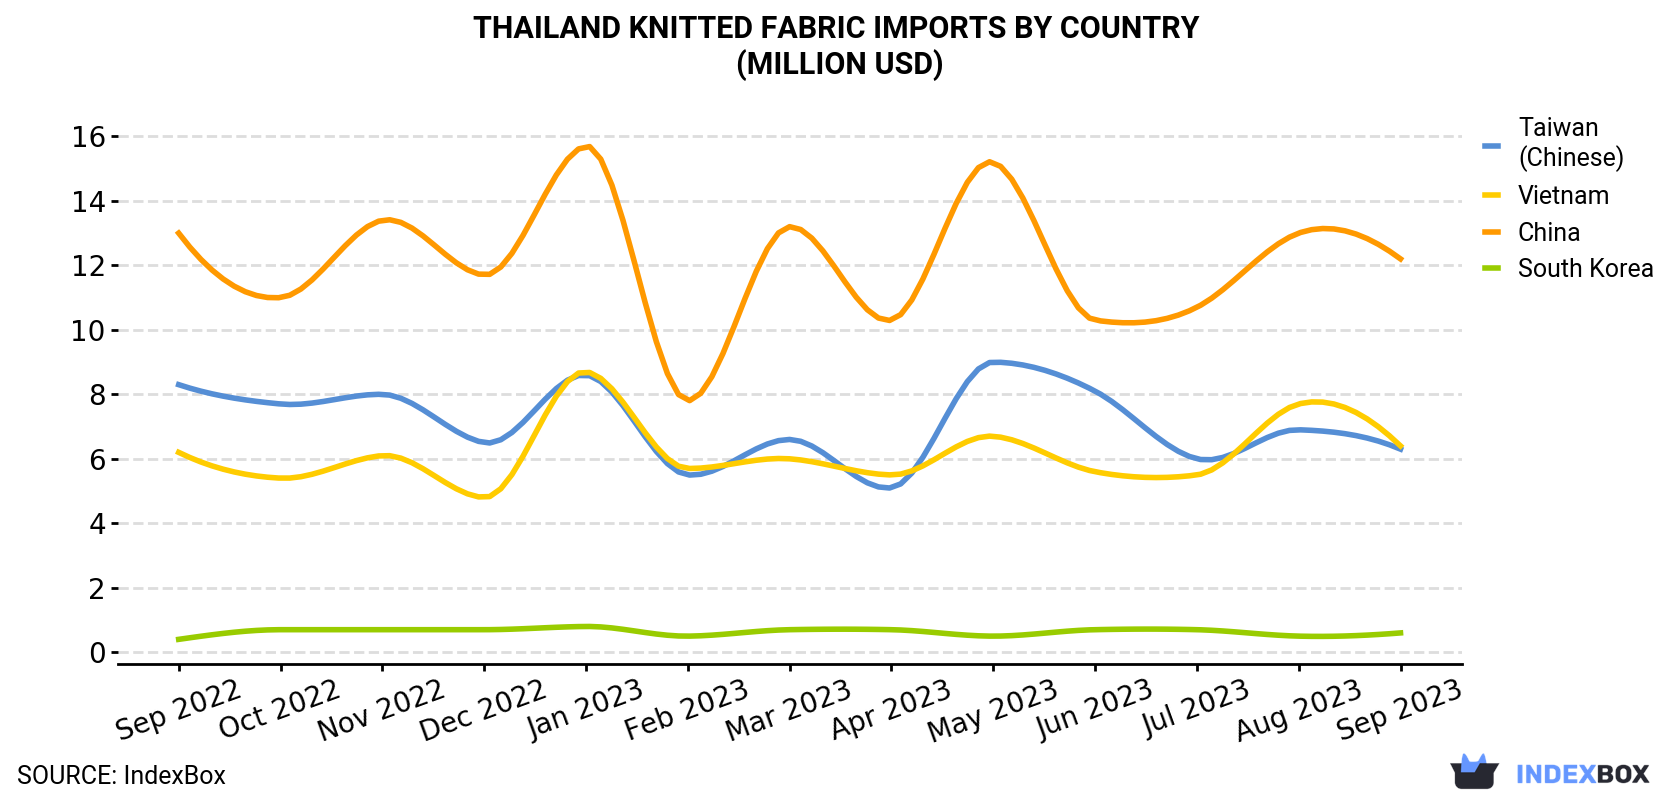 Thailand Knitted Fabric Imports By Country (Million USD)